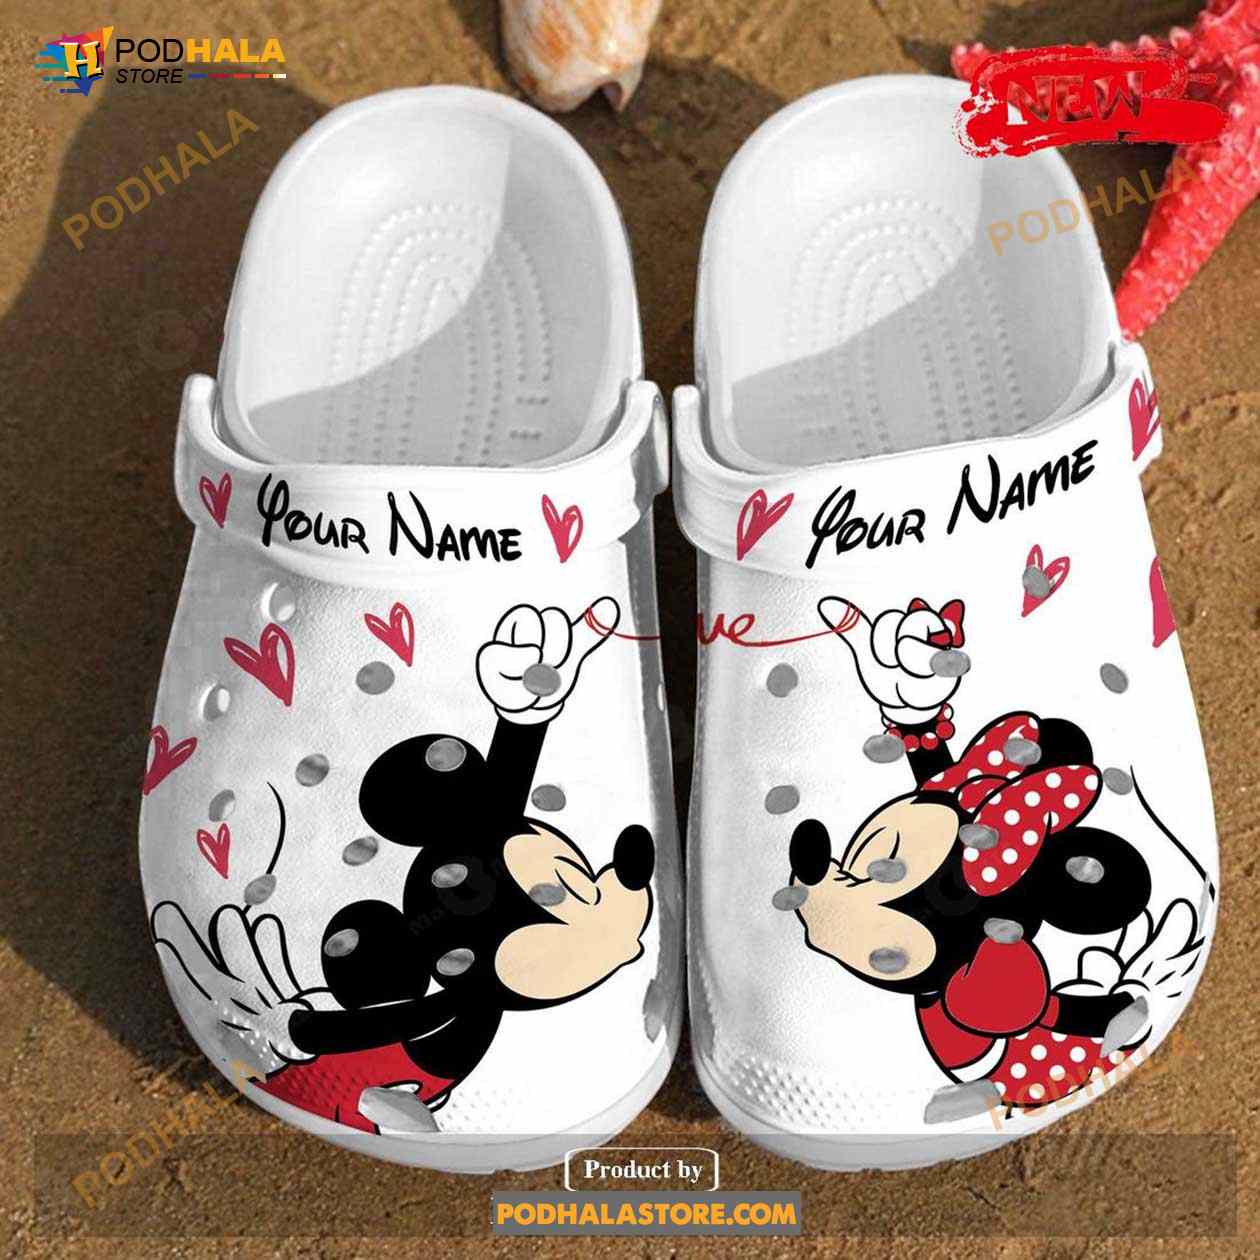 Crocs Jibbitz Mickey Mouse,Mickey Mouse And Friends Crocs,Disney Crocs  Charms - Ingenious Gifts Your Whole Family